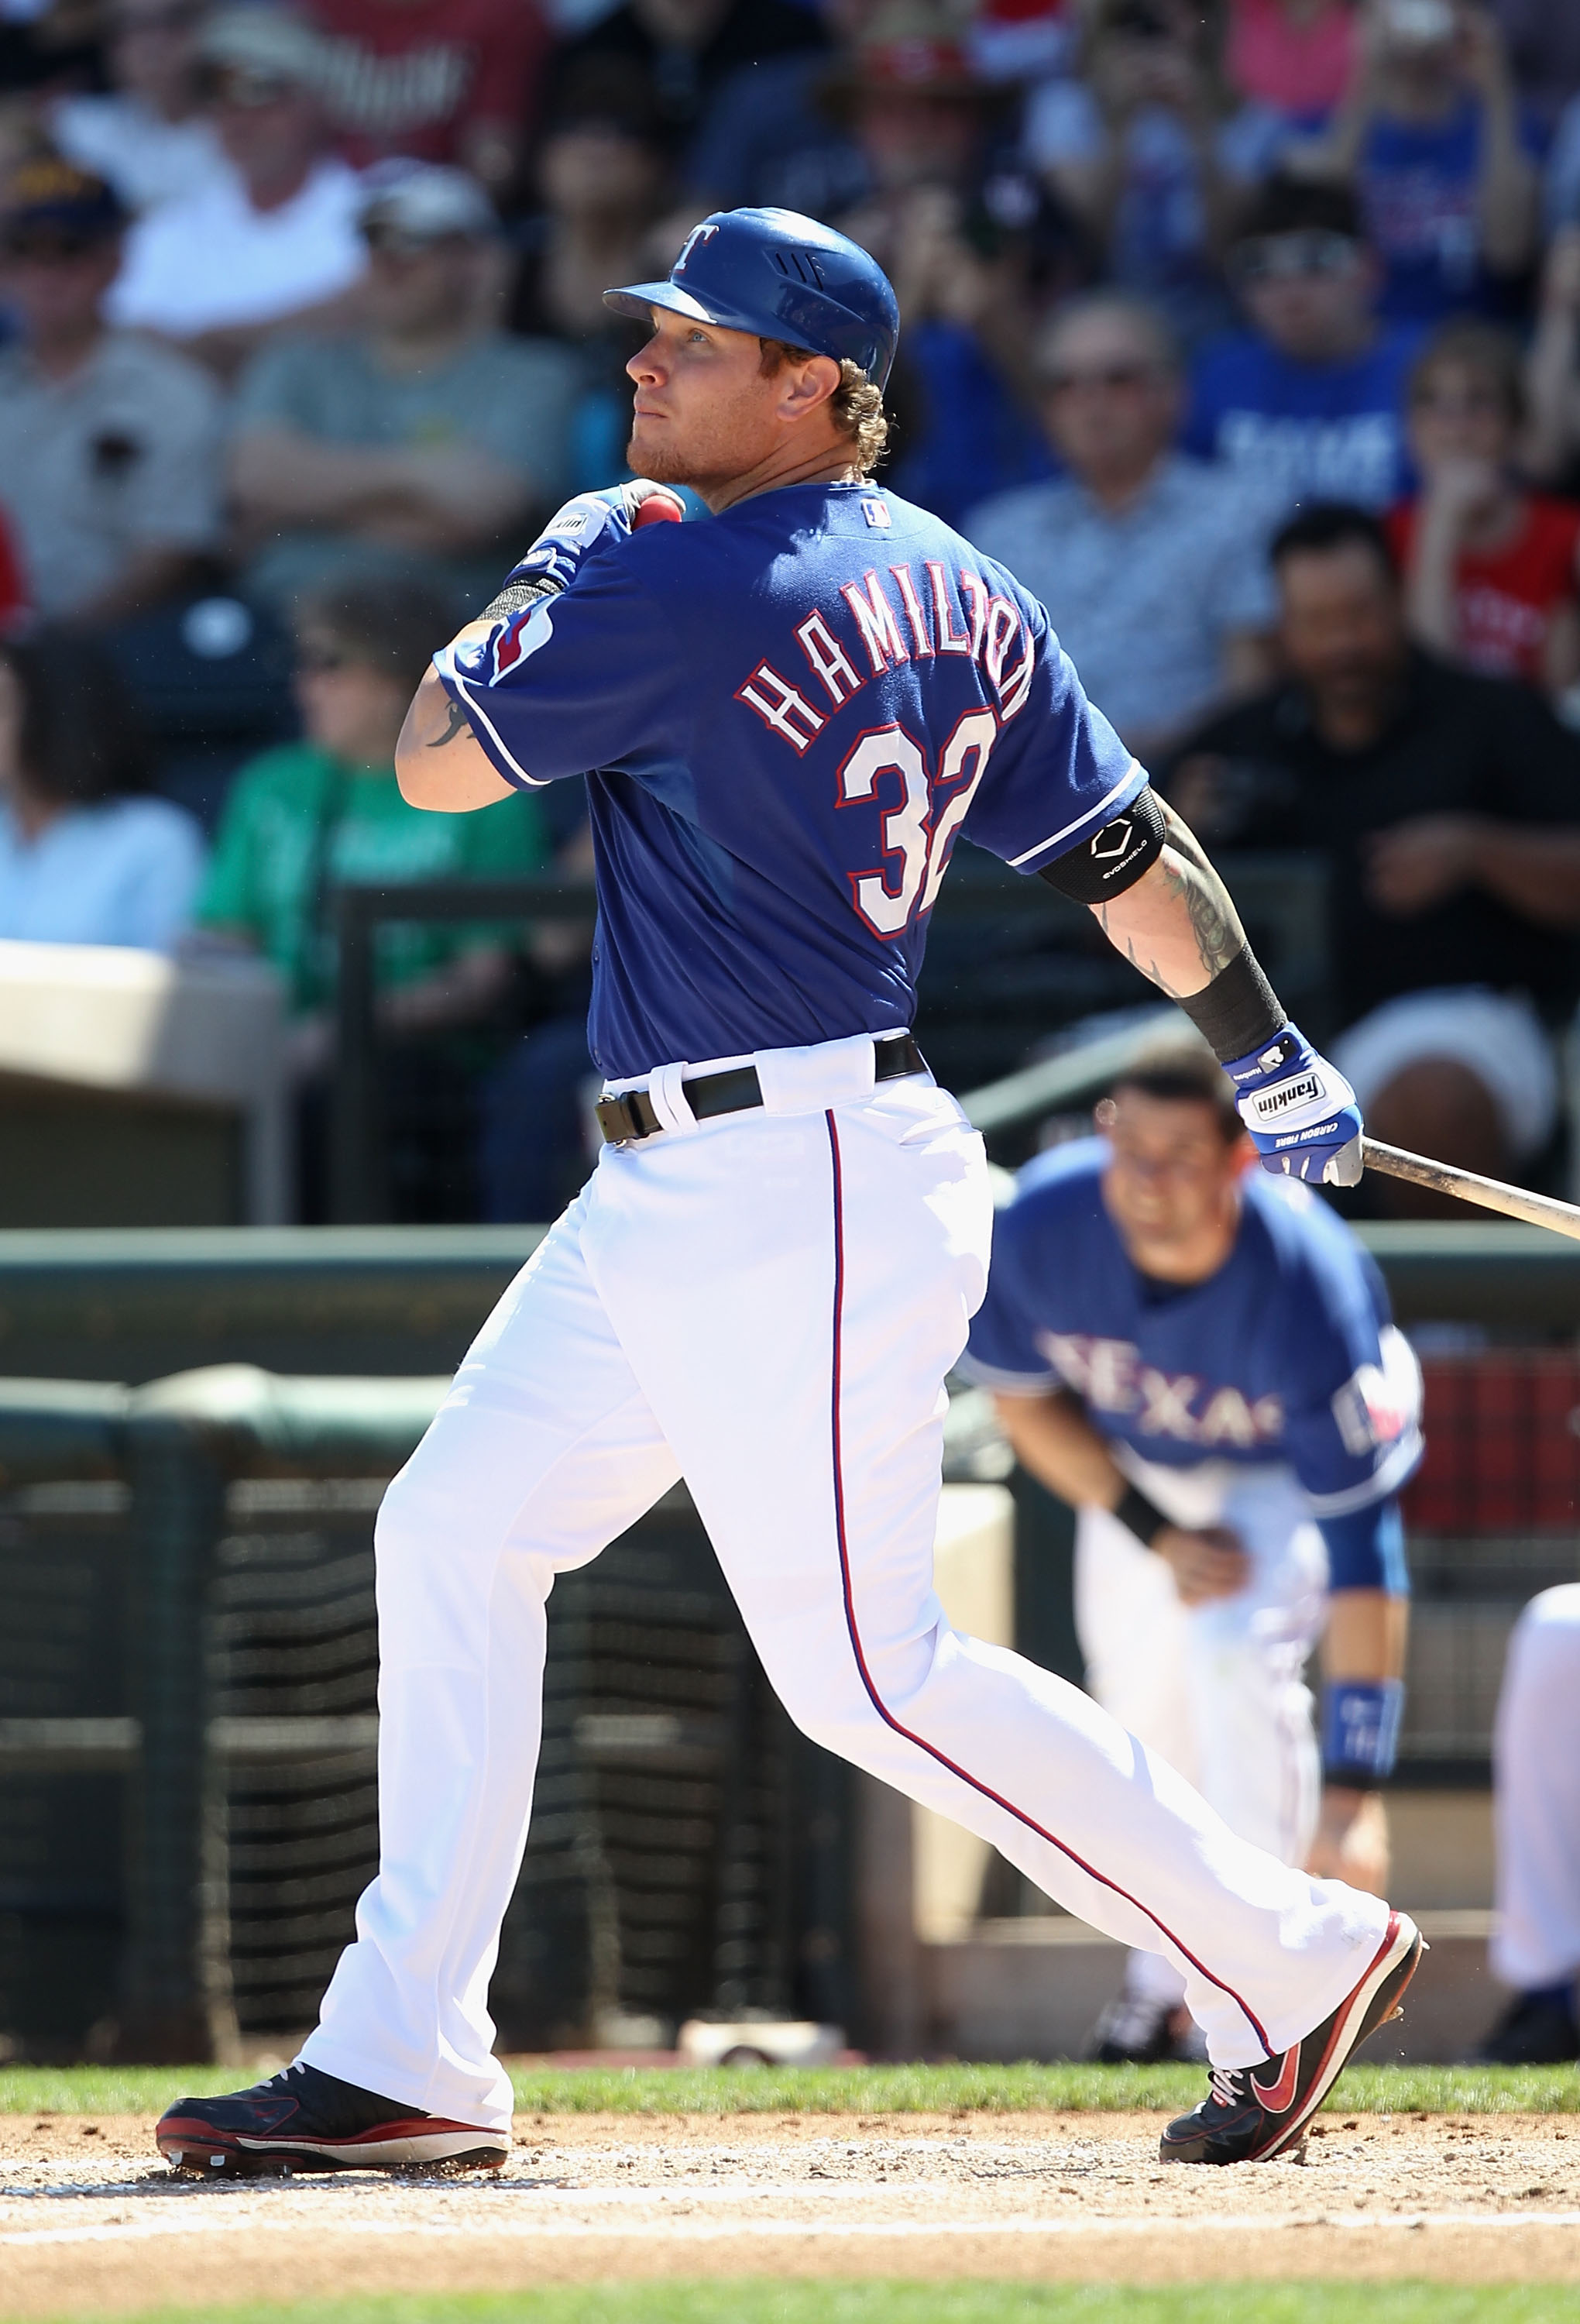 SURPRISE, AZ - MARCH 11:  Josh Hamilton #32 of the Texas Rangers hits a RBI single against the Cincinnati Reds during the first inning of the spring training game at Surprise Stadium on March 11, 2011 in Surprise, Arizona.  (Photo by Christian Petersen/Ge